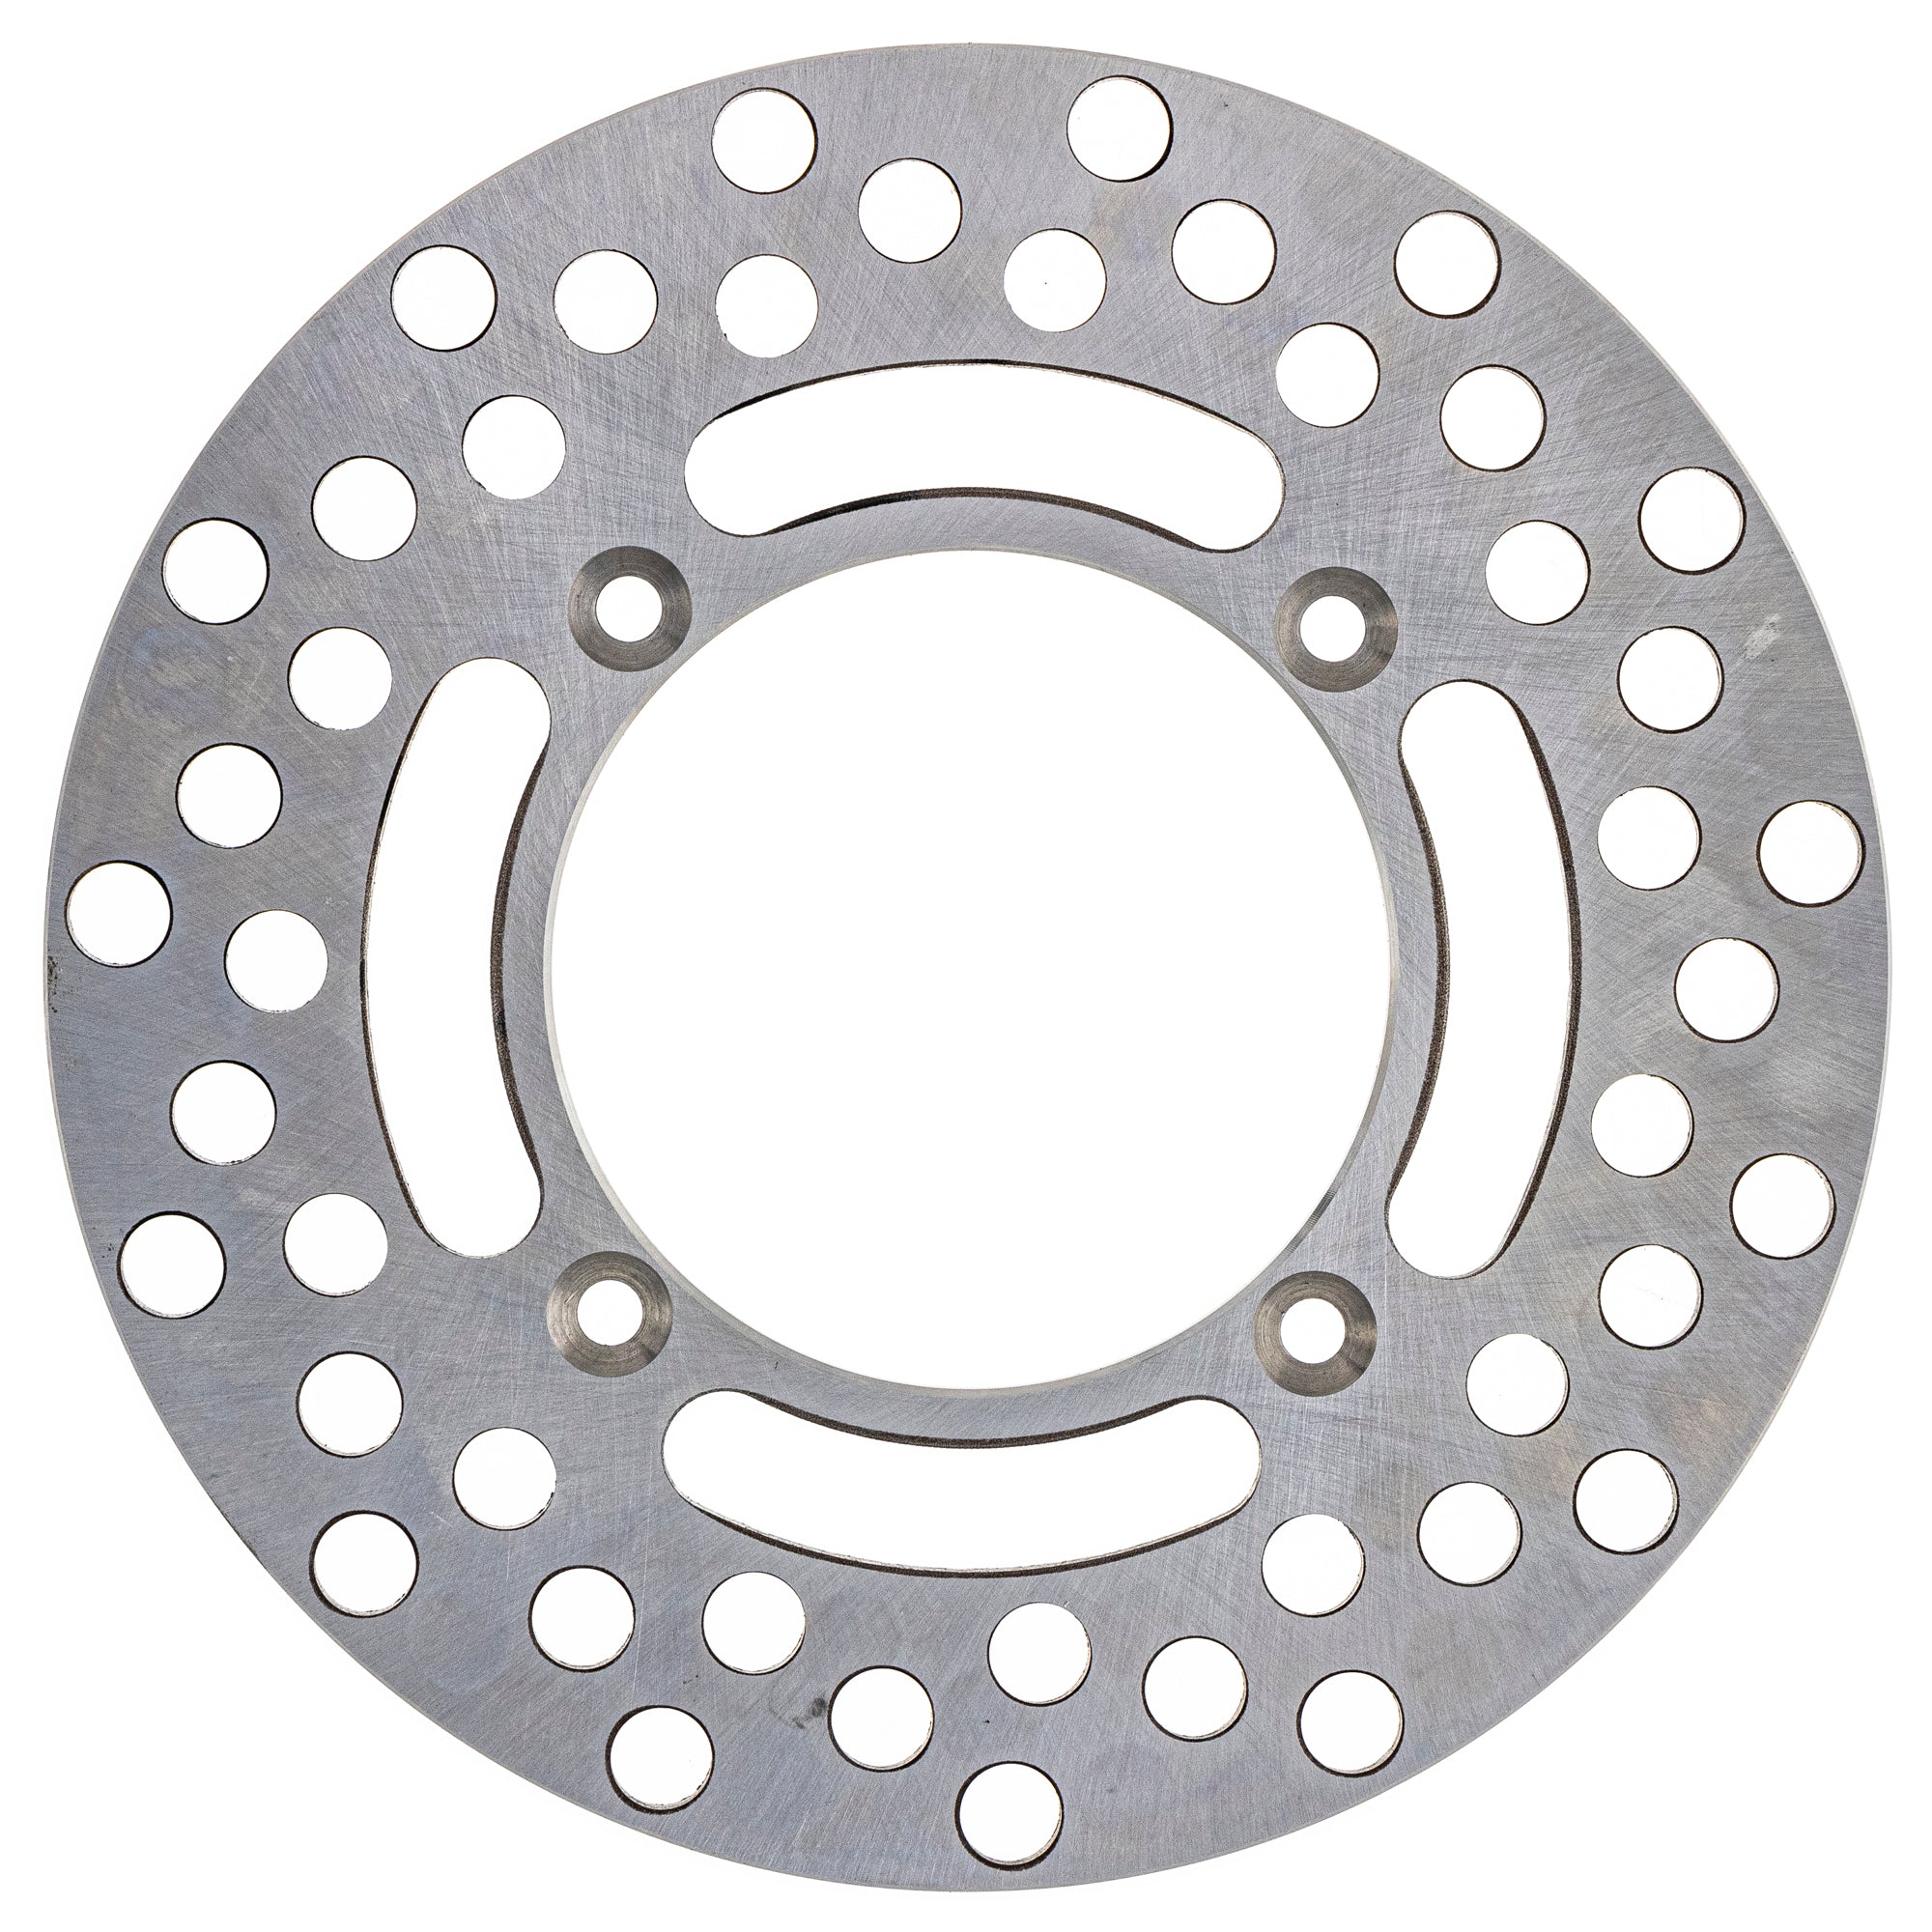 Rear Brake Rotor for zOTHER RM85L RM85 RM80 KX80 NICHE 519-CRT2302R